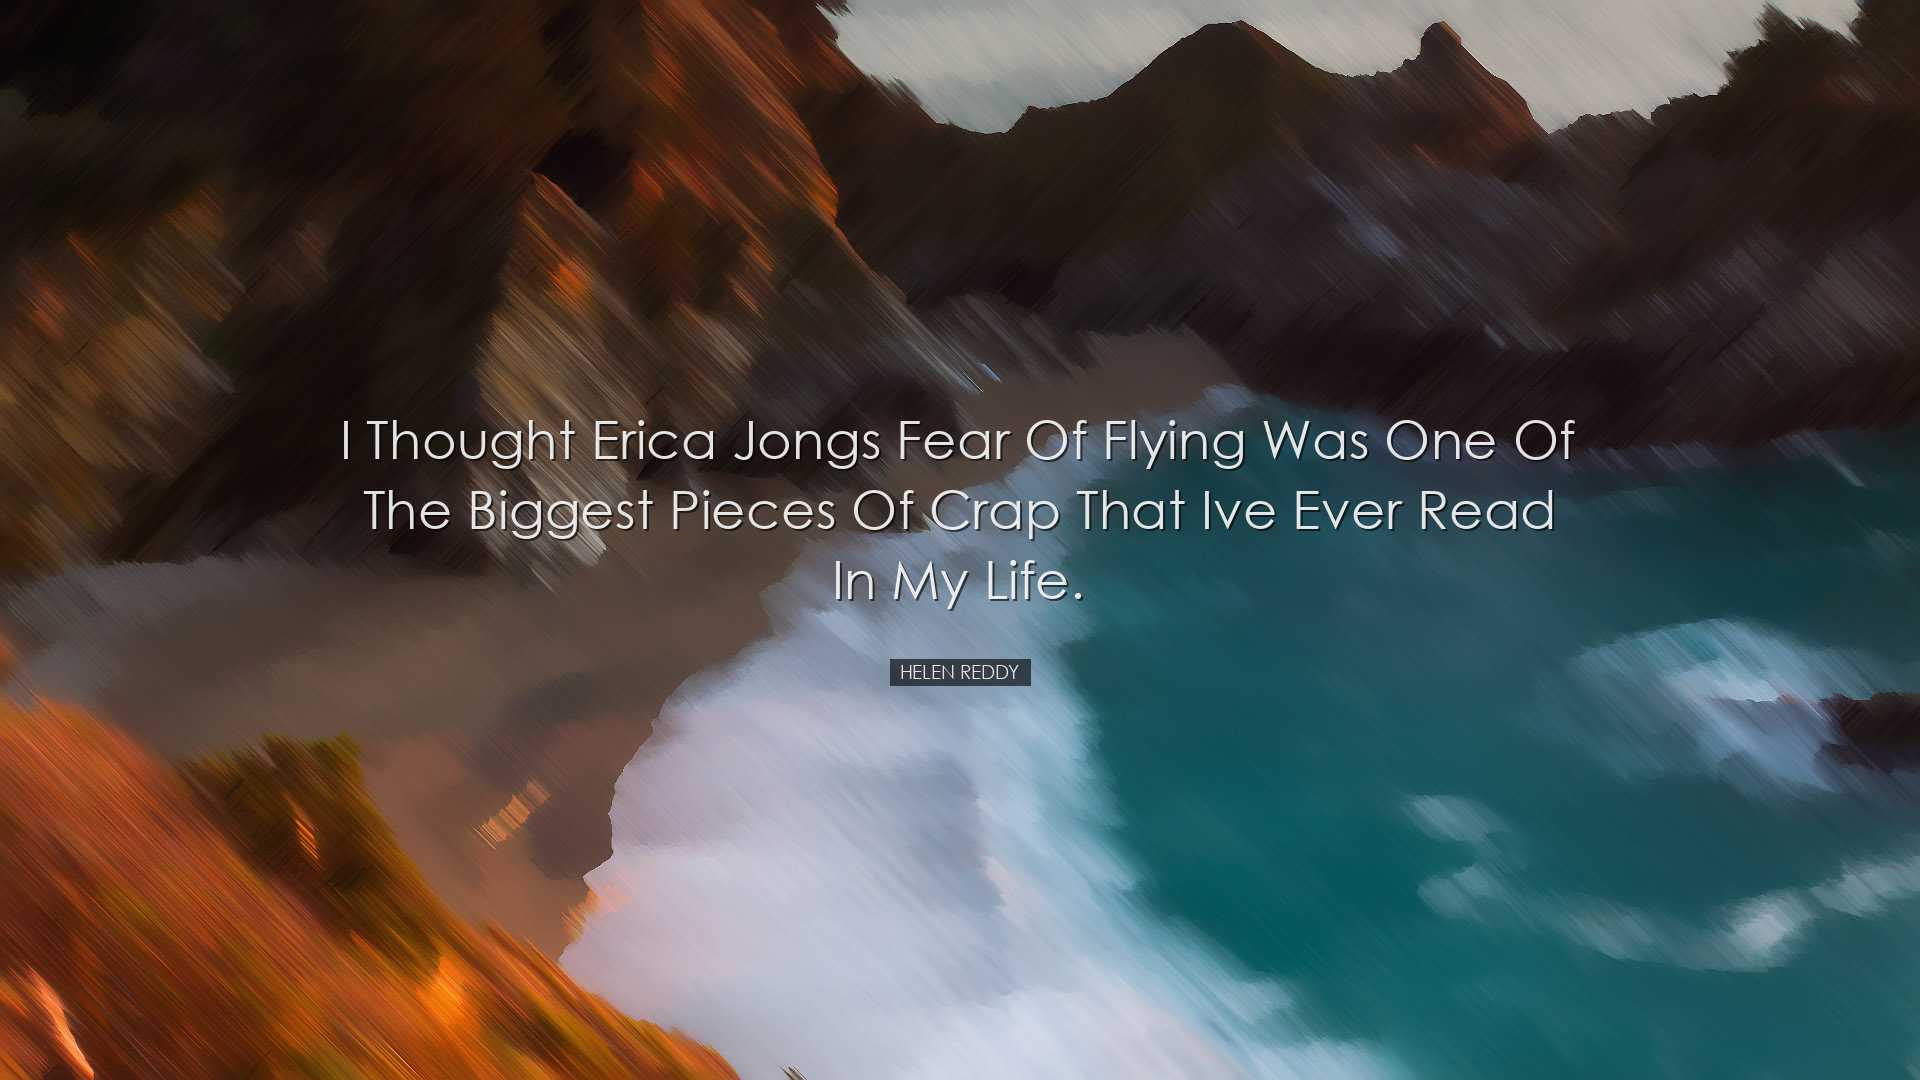 I thought Erica Jongs Fear of Flying was one of the biggest pieces